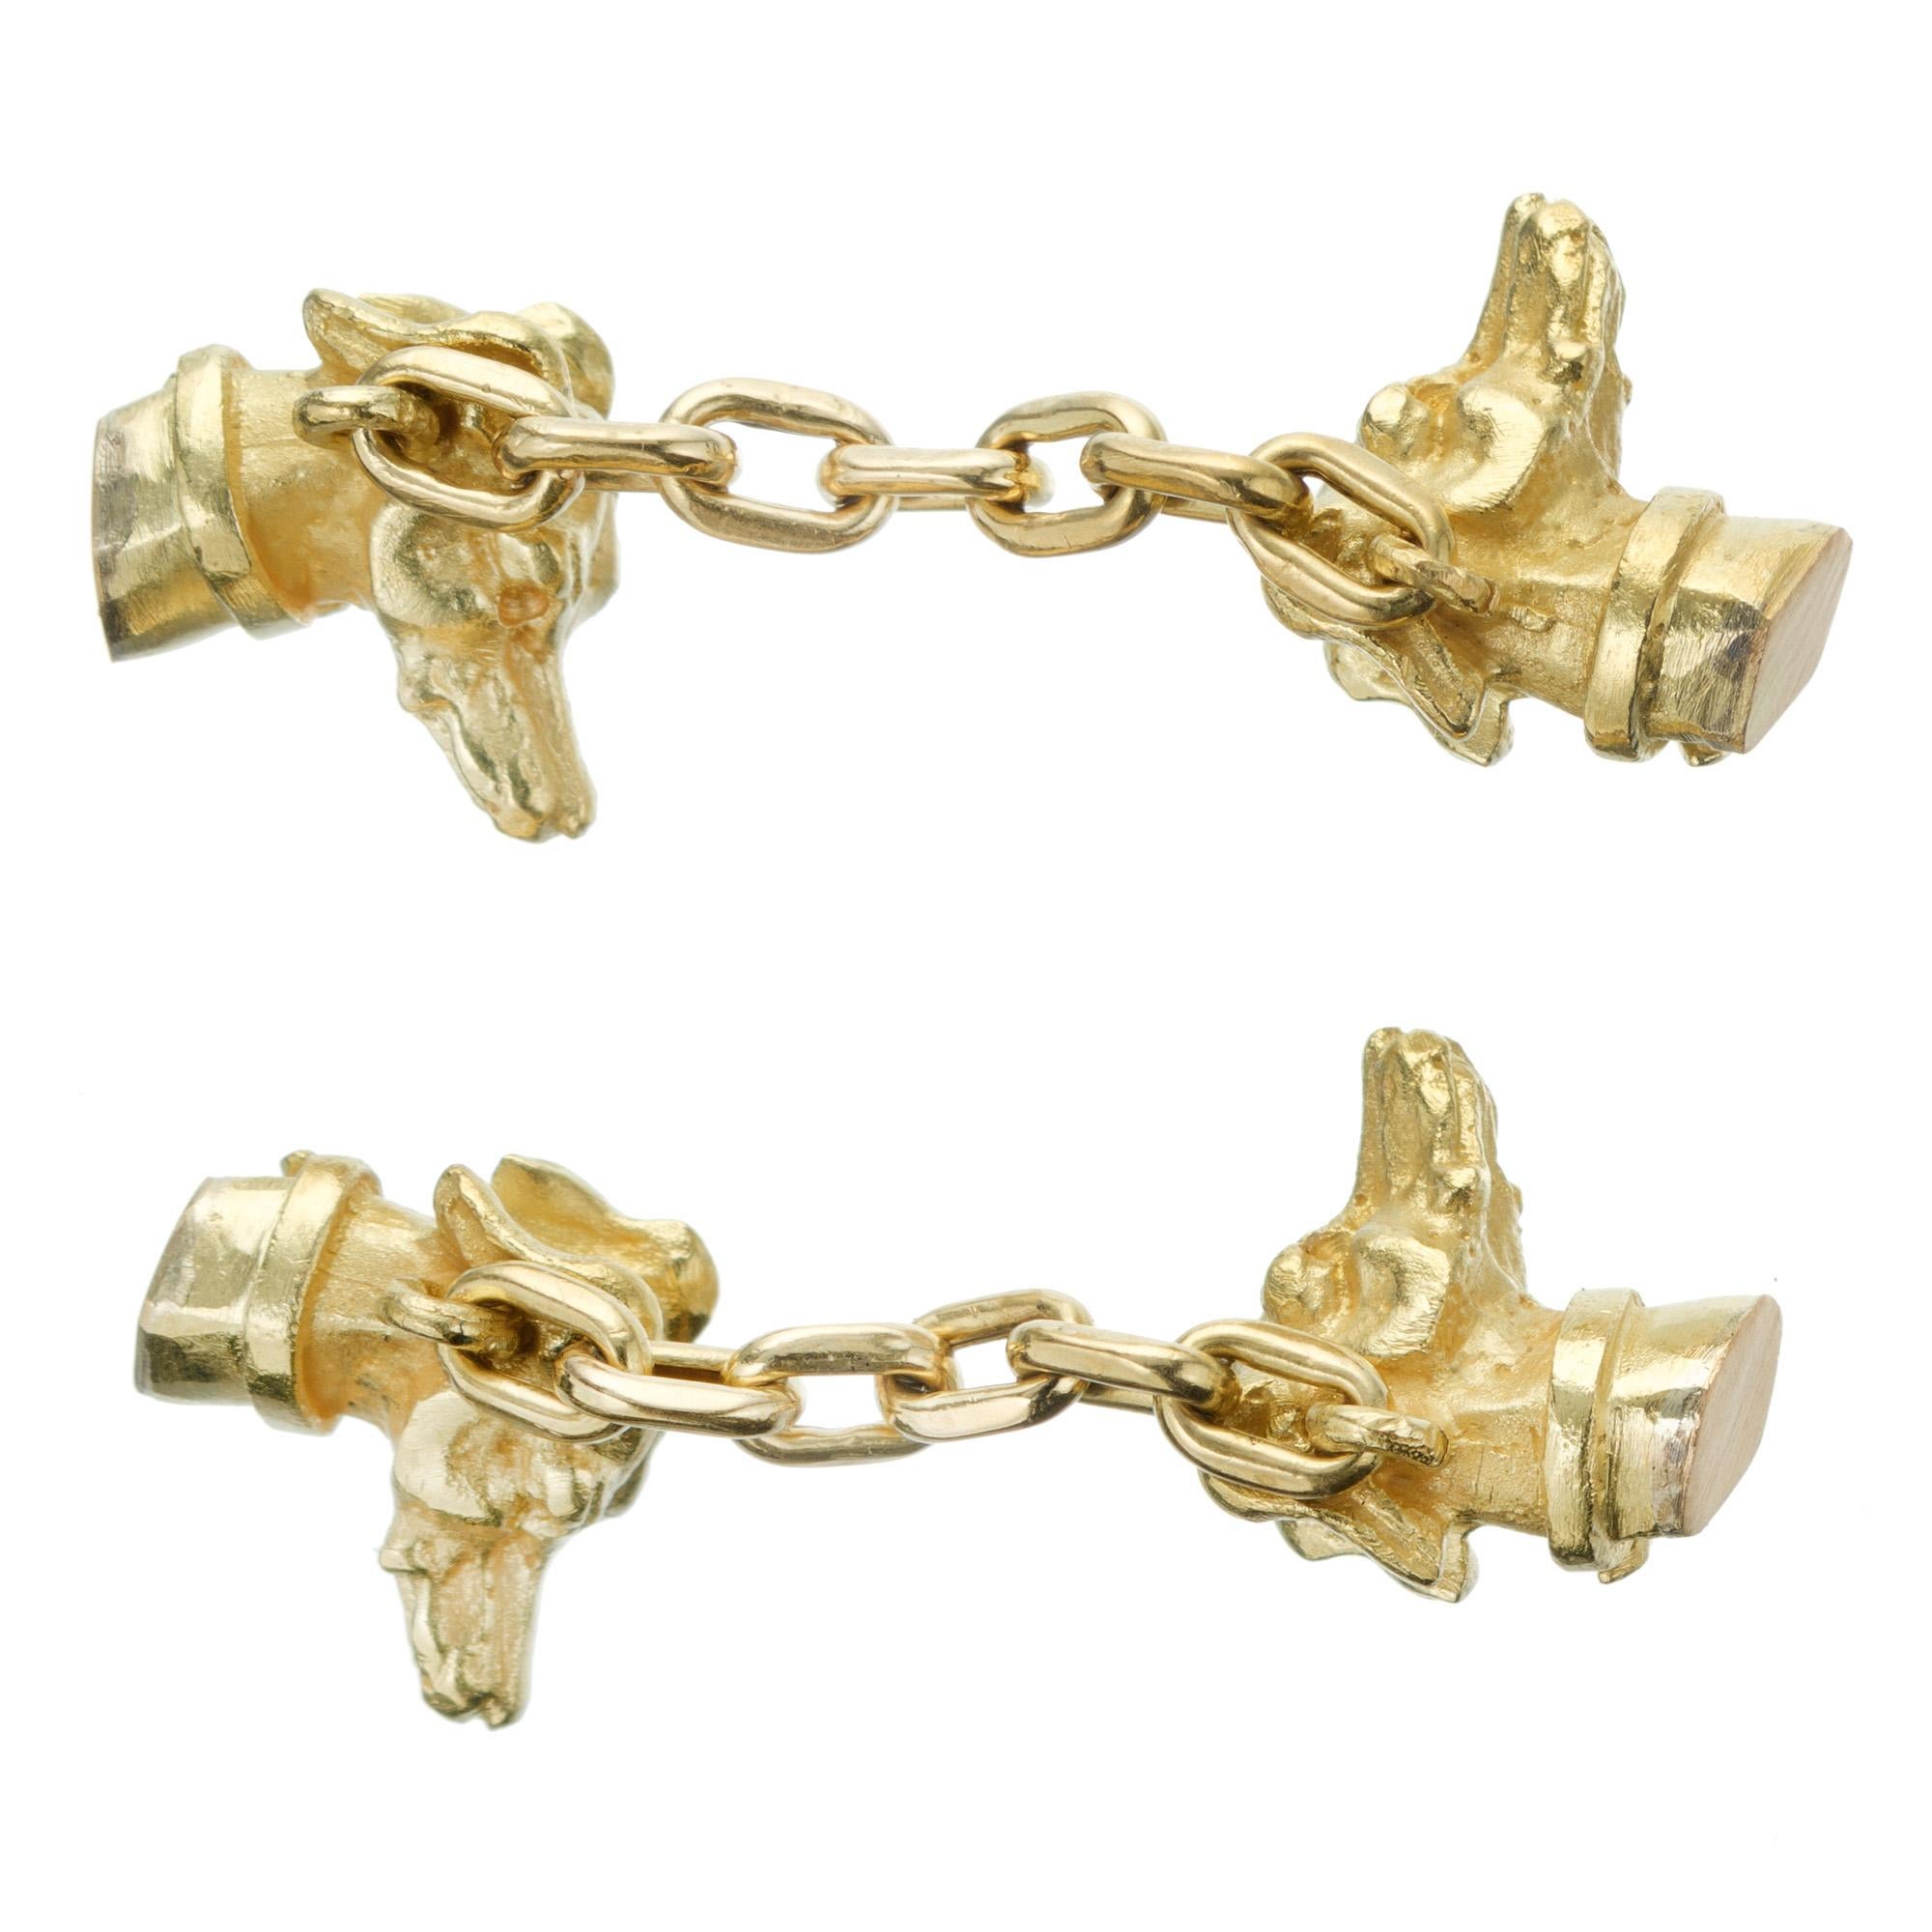  Early 1900'sVintage double sided Doberman chain cufflinks in solid 18k yellow gold. circa 1900's

18k yellow gold 
13.3 grams 
1.41 length




